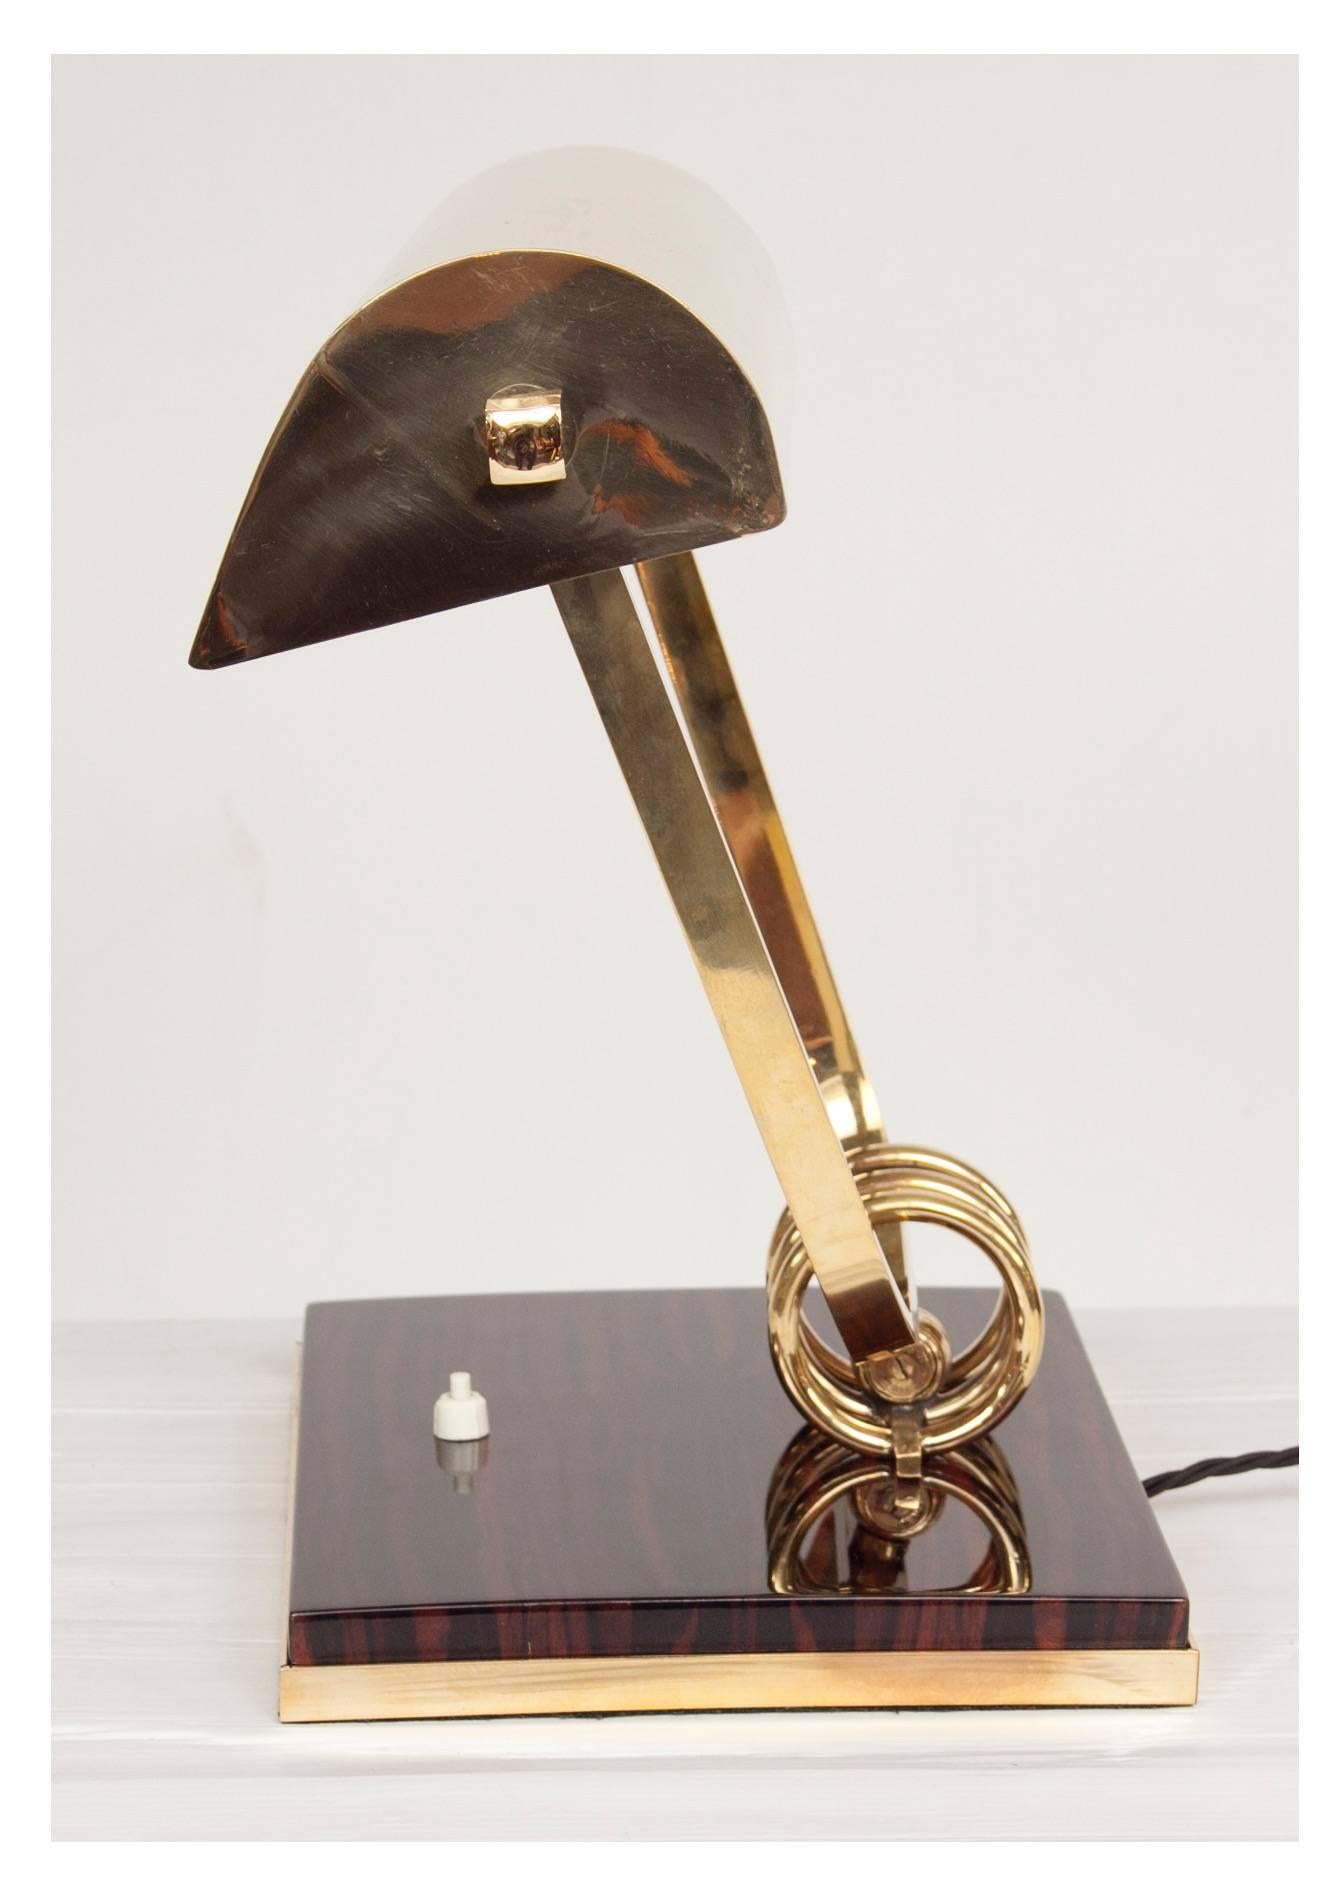 Art Deco desk lamp.
A fine Art Deco desk lamp, exceptional quality, finished in Macassar and polished brass.
Measures: H 32cm, W 26cm, D 21cm
USA, circa 1930.